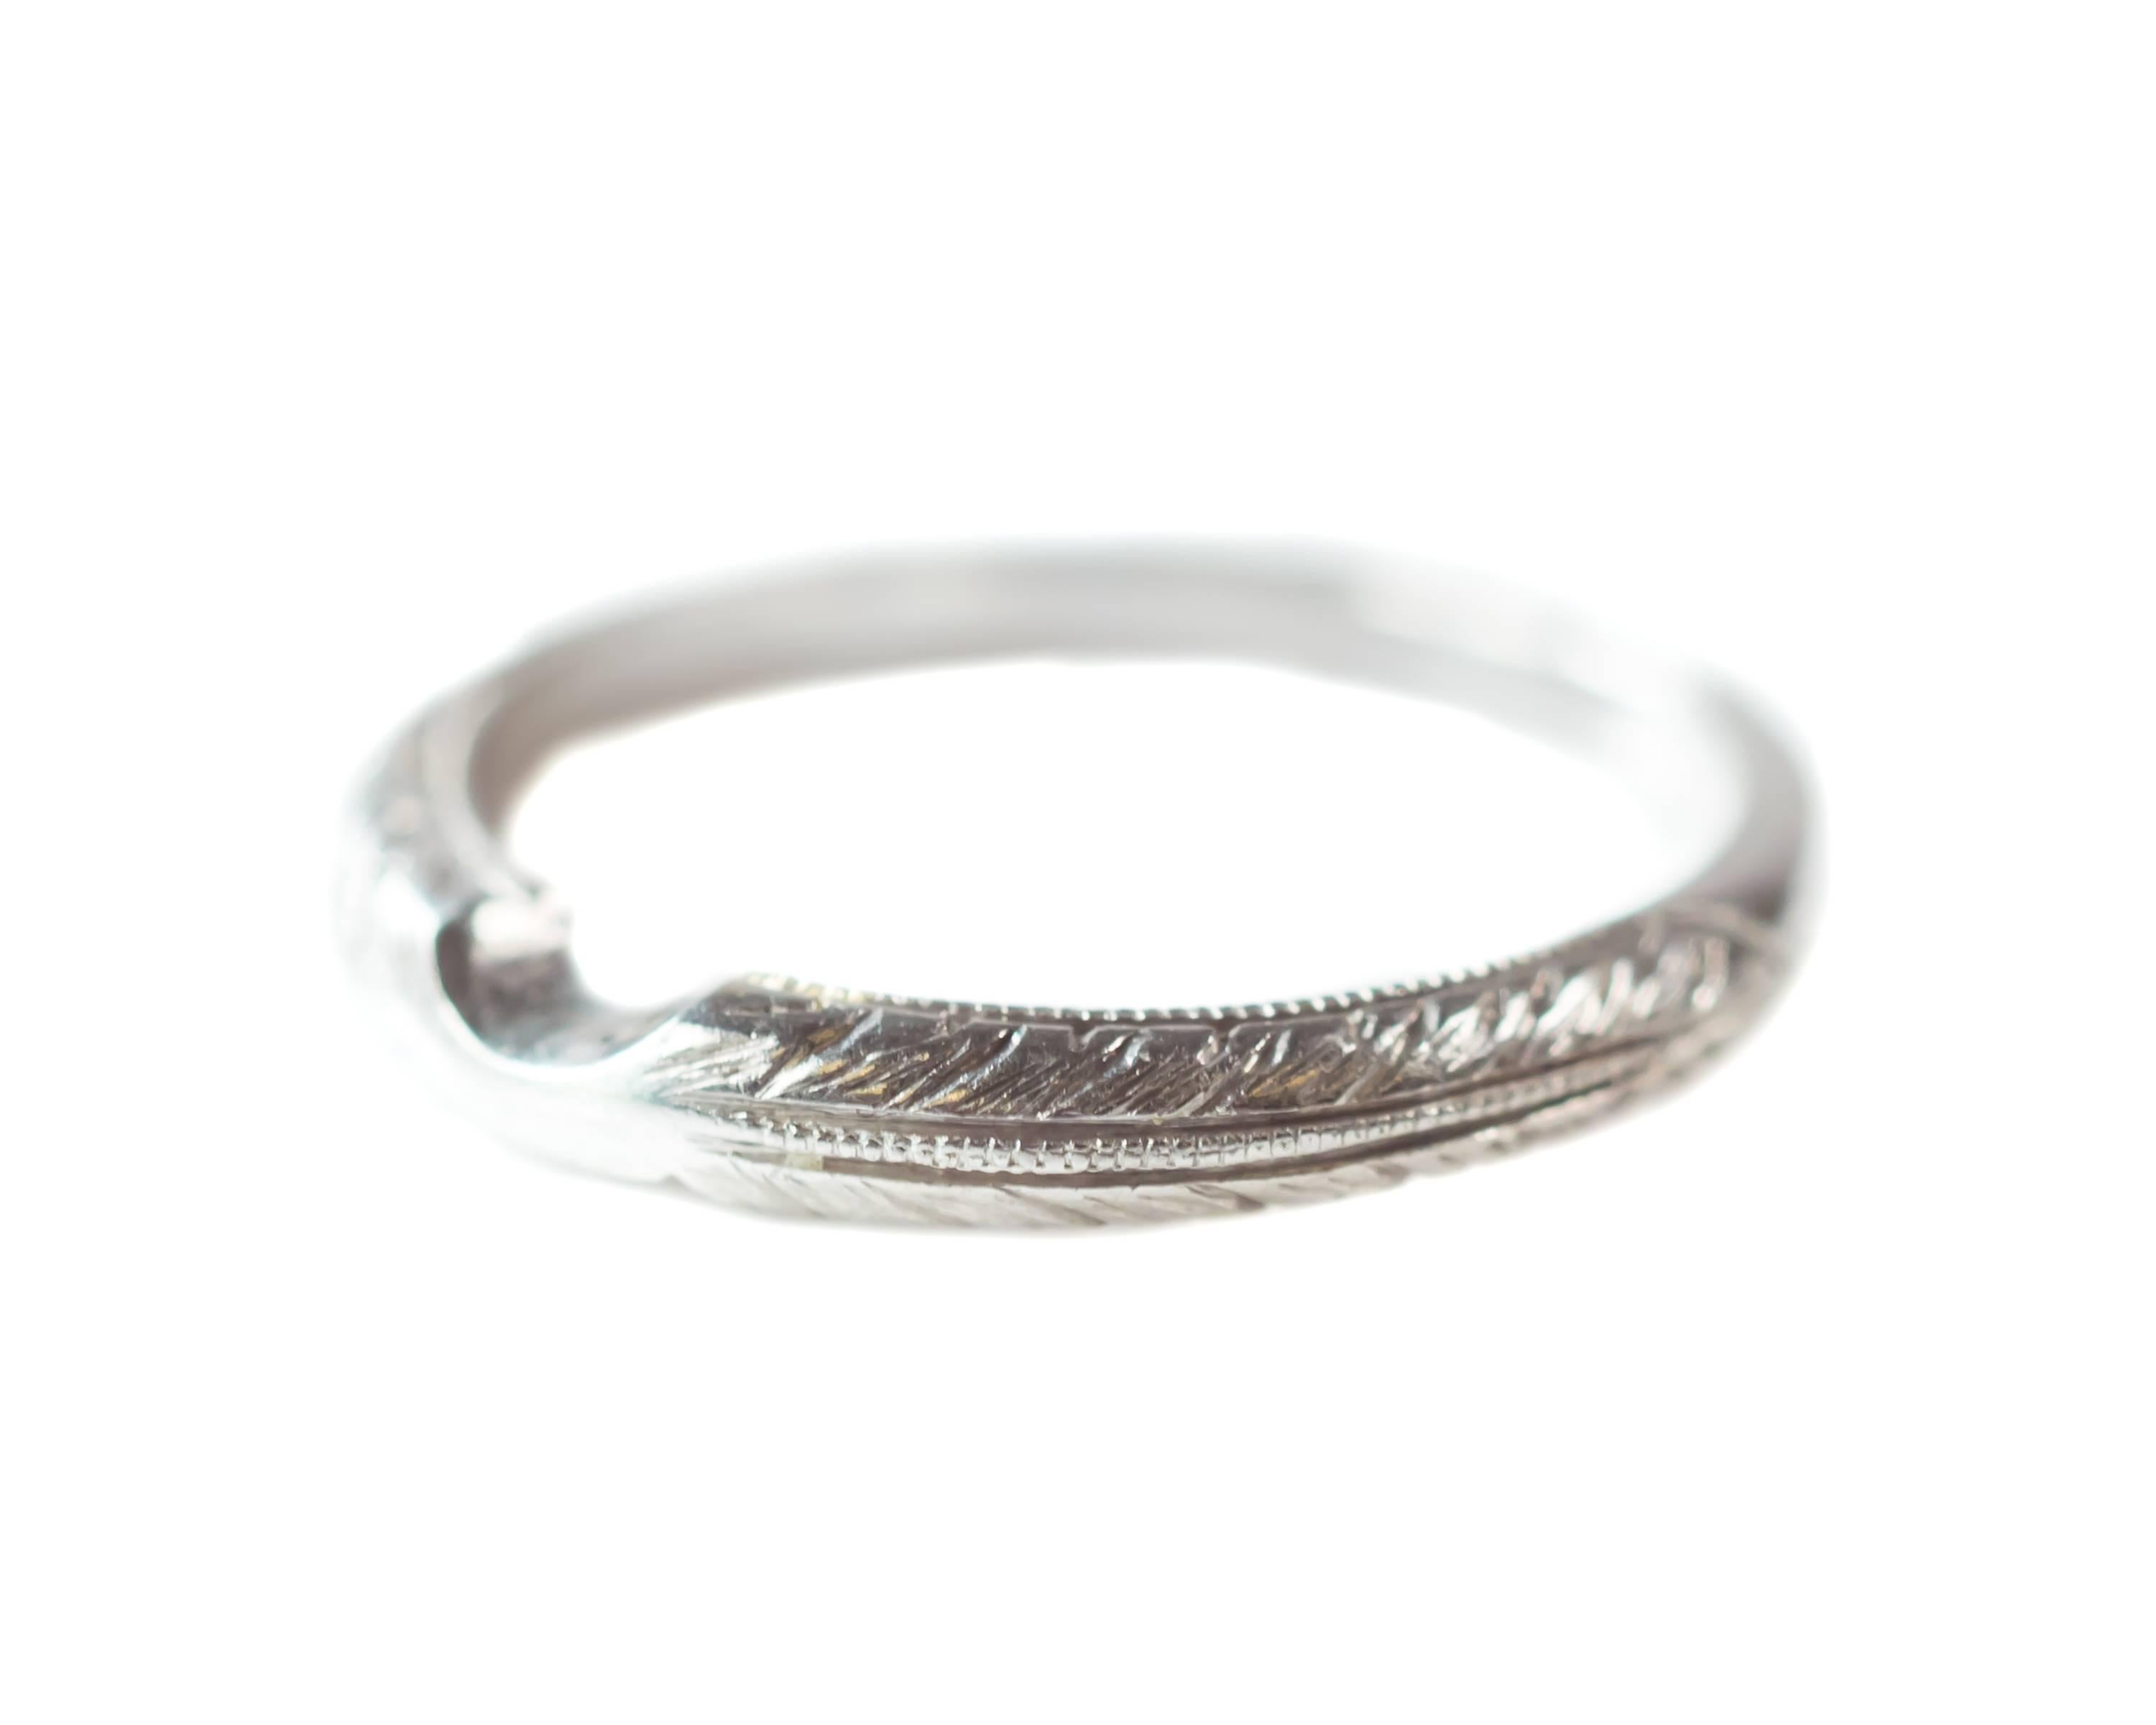 Women's 1960s Platinum Curved Wedding Band Ring